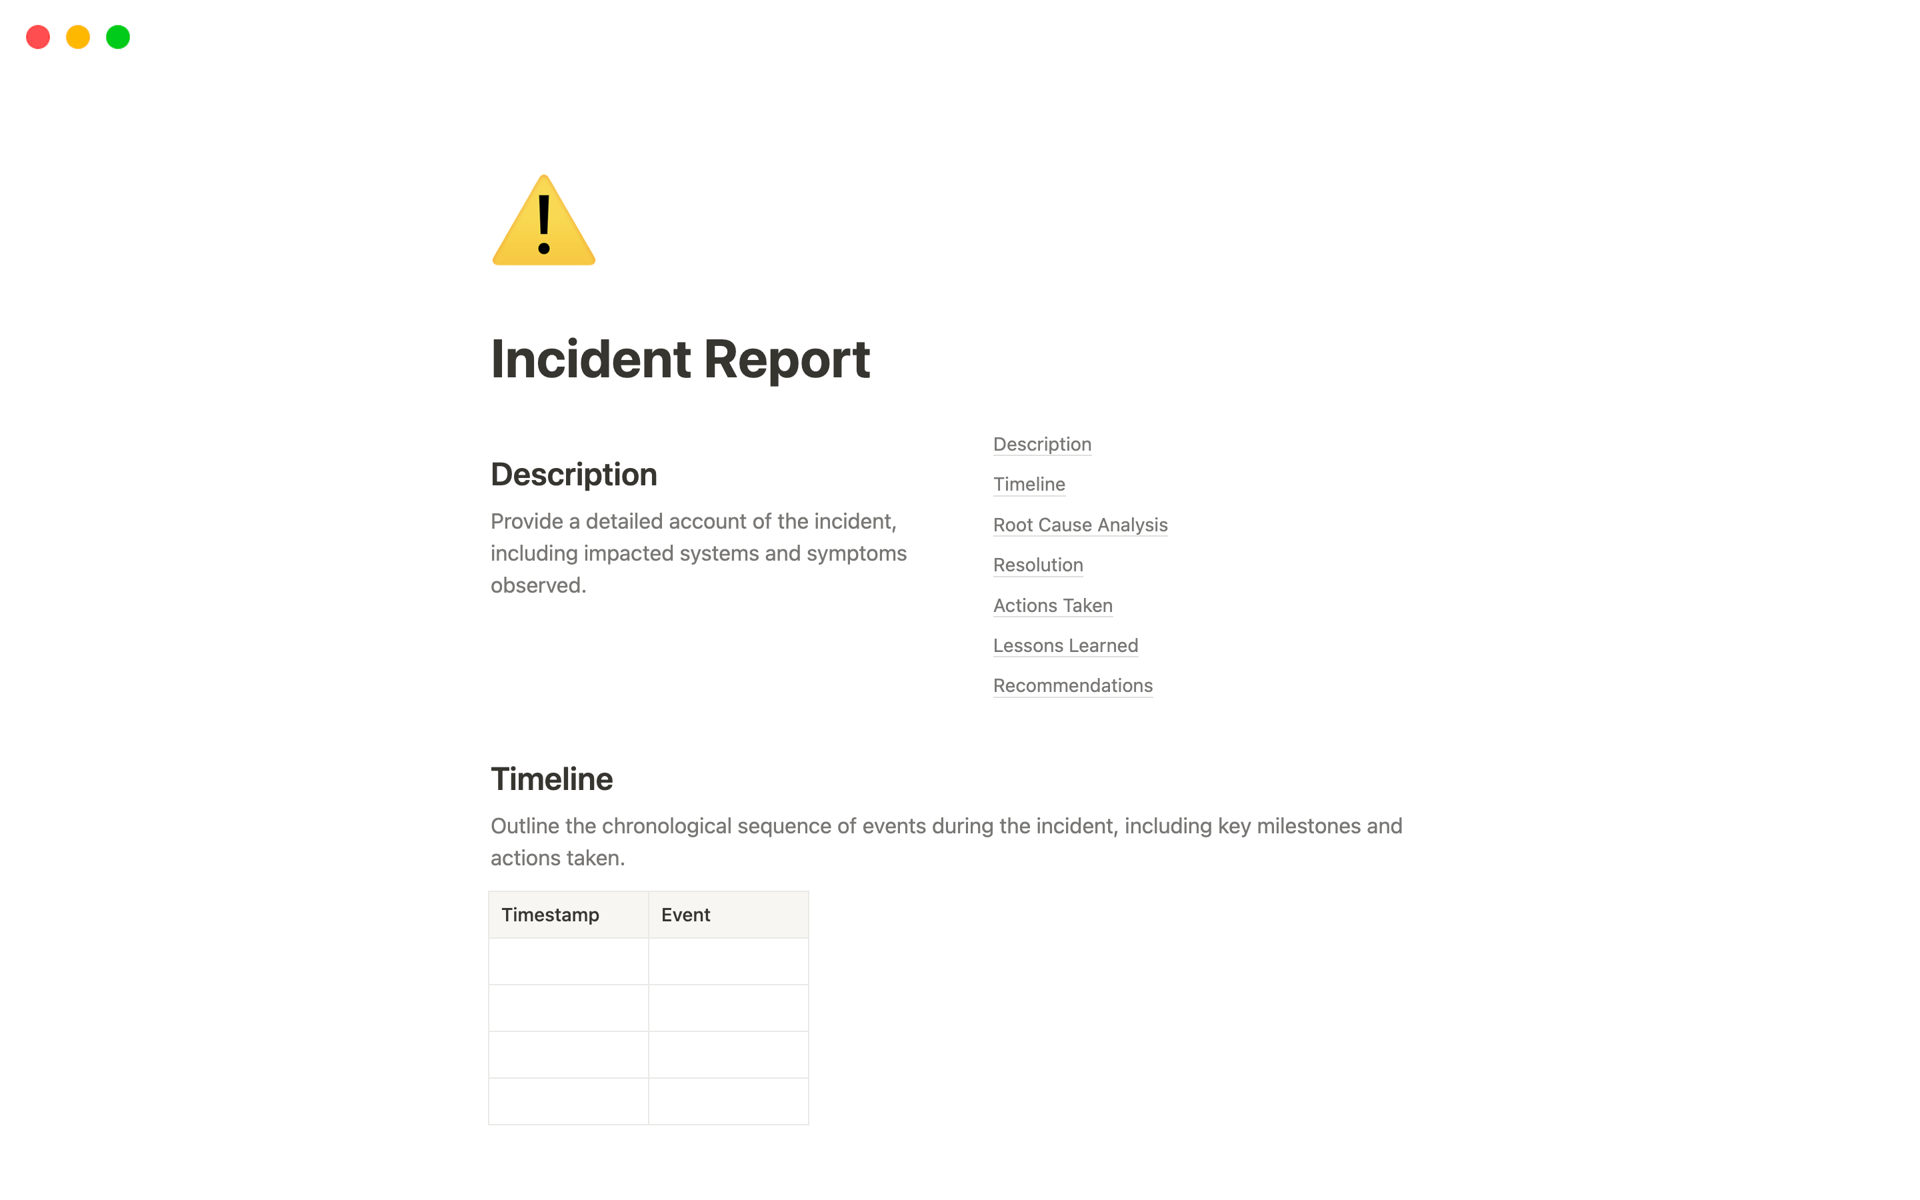 Keep track of incidents, their timelines and details.